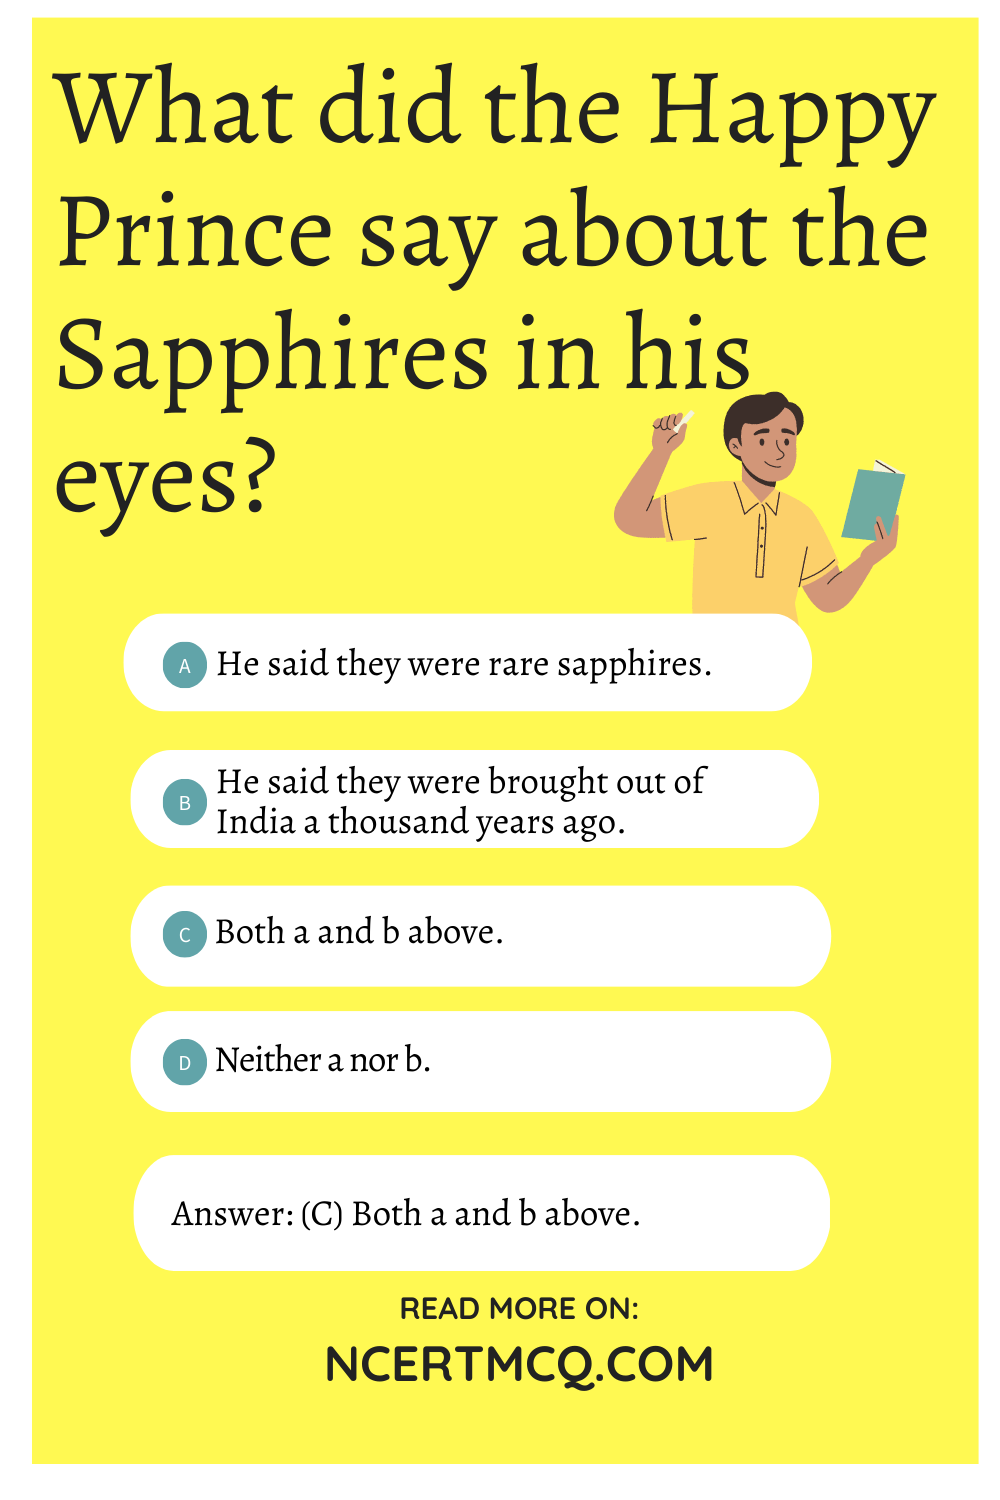 What did the Happy Prince say about the Sapphires in his eyes?